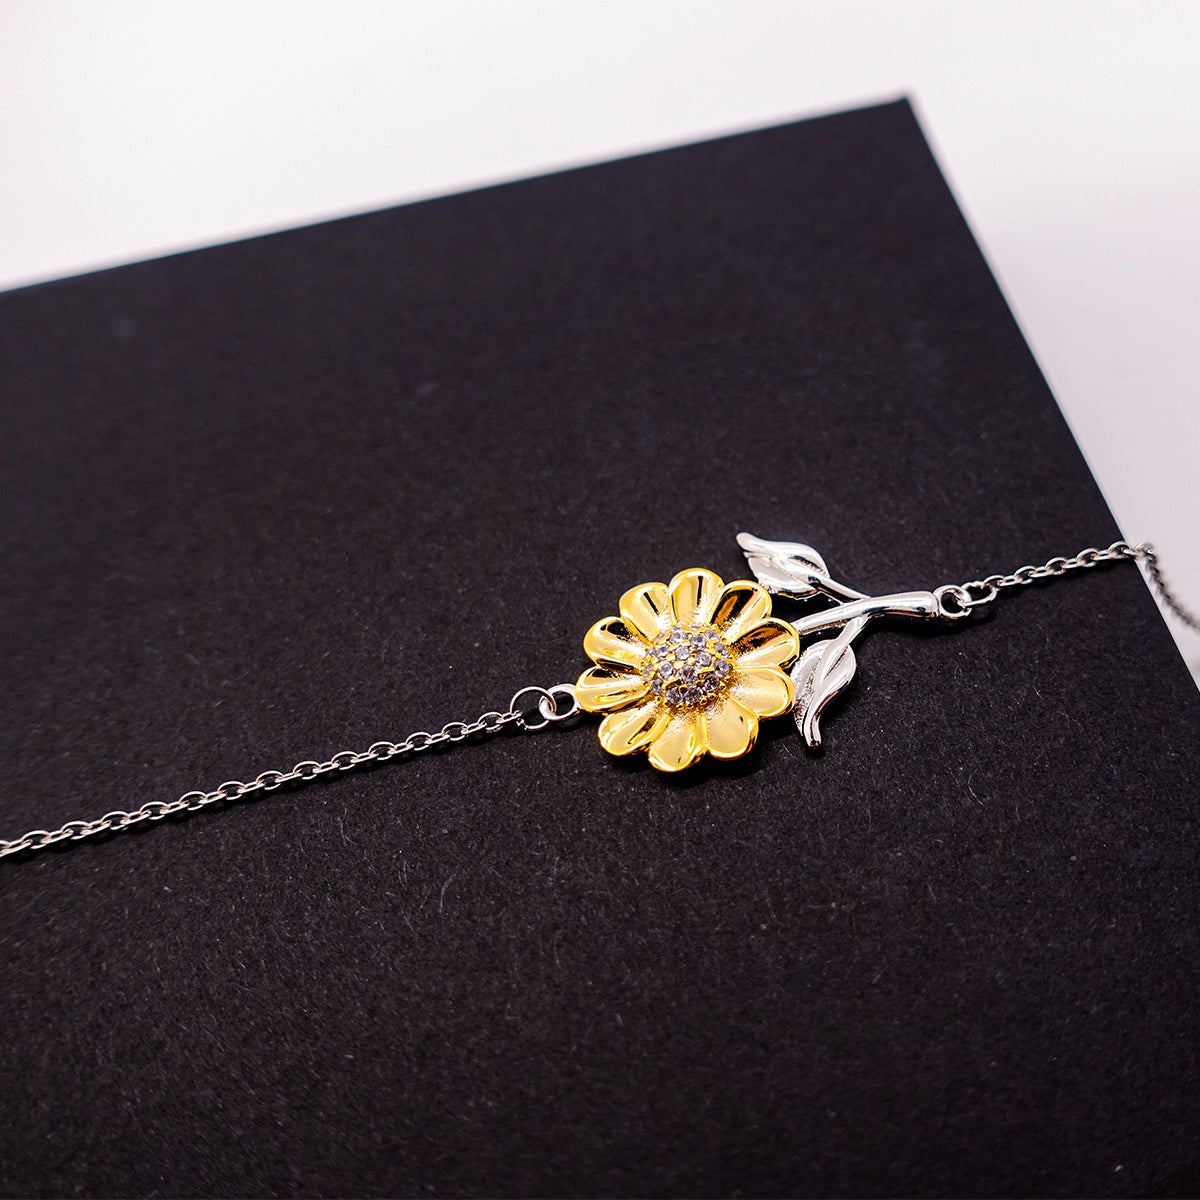 Sunflower Bracelet for Other Mom - Youll always hold a special place in my heart, inspiring hope and confidence for Mothers Day, Birthday, Christmas, and more